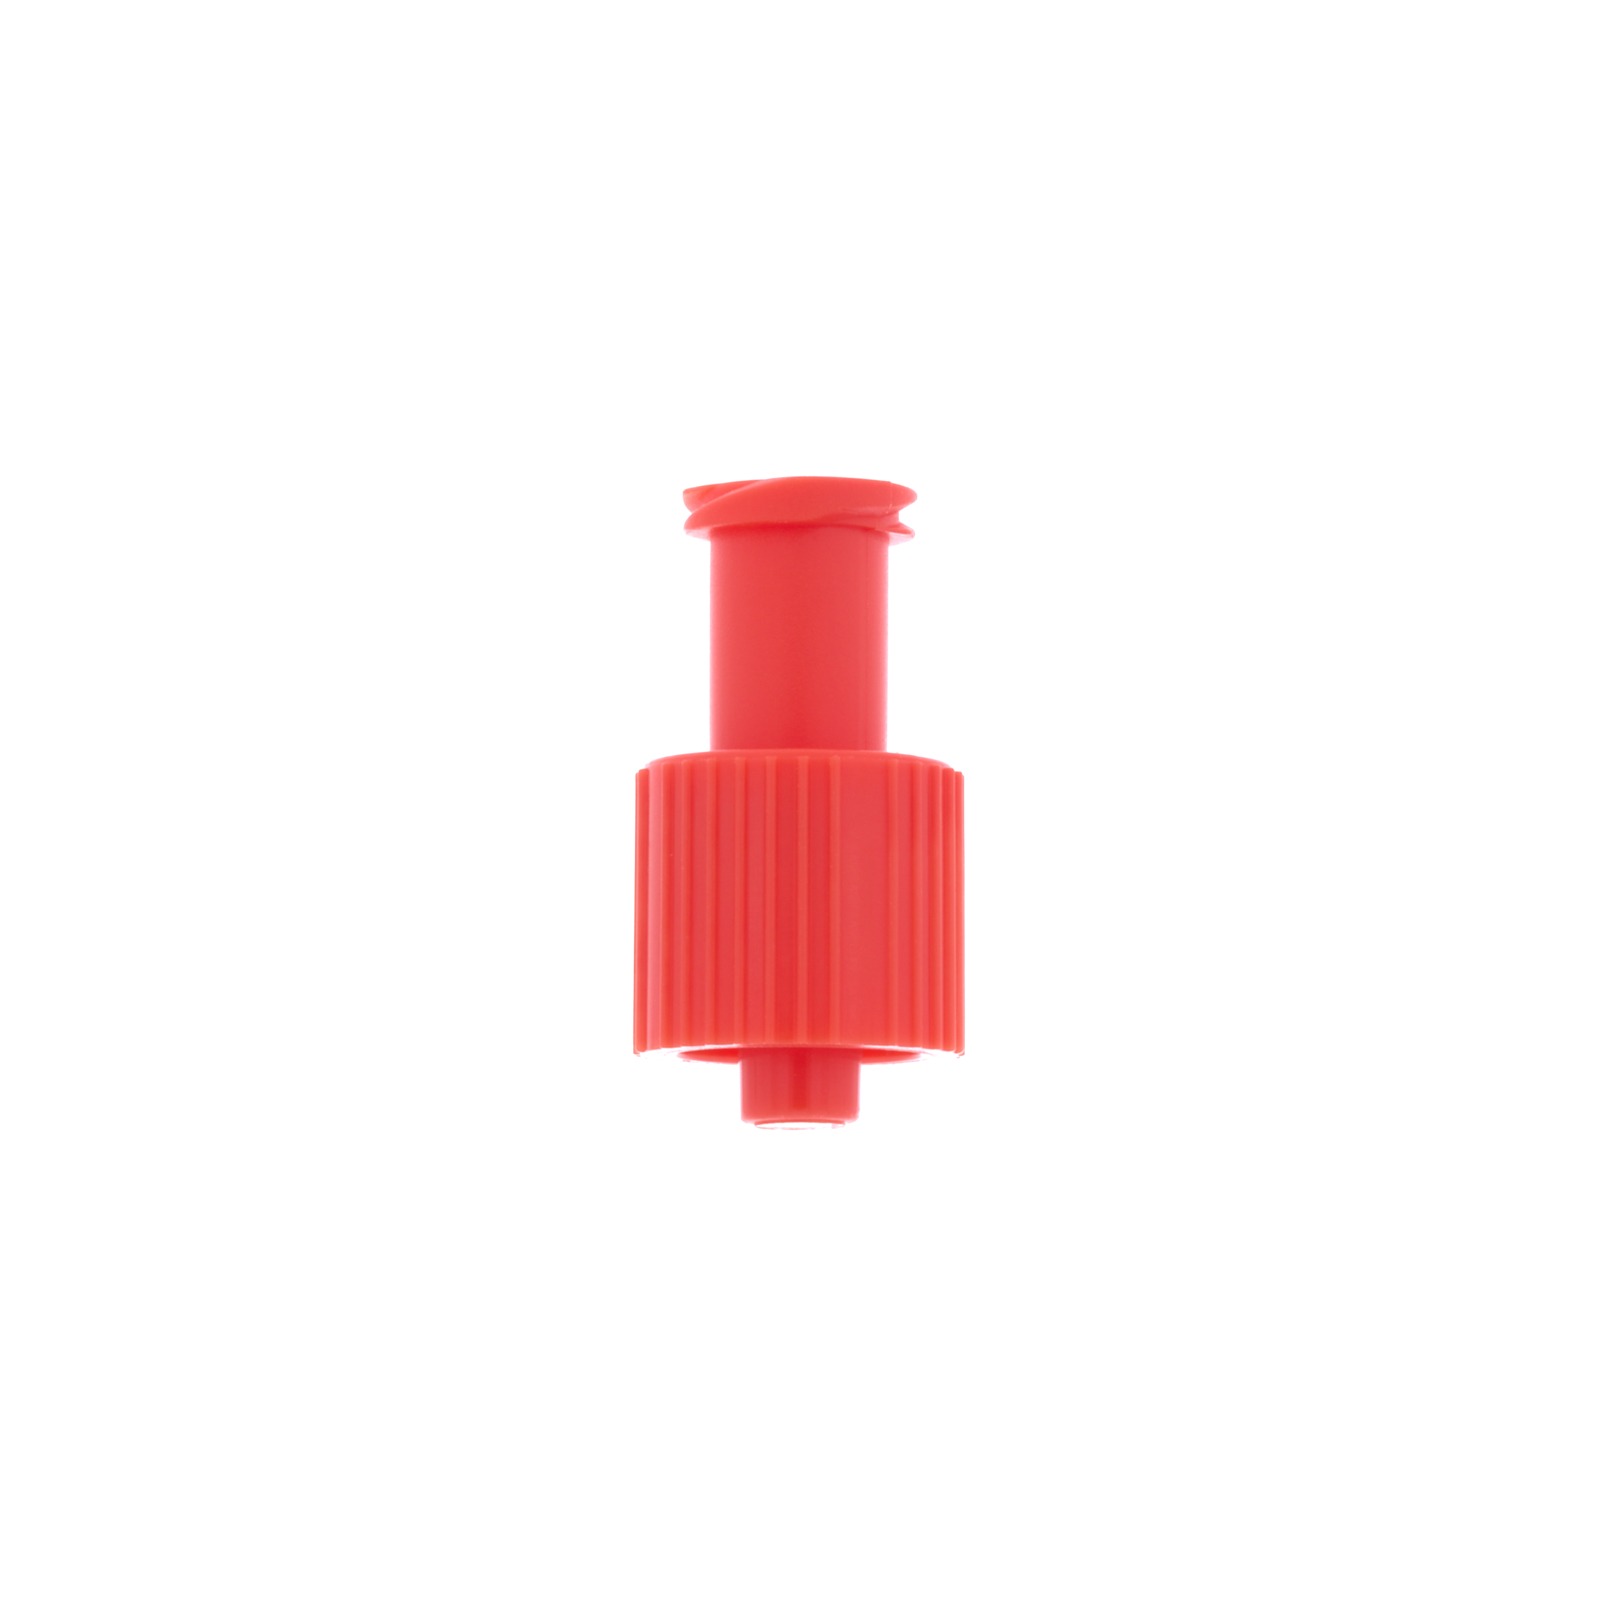 muroplas red combi-stopper long-cone closing cones male to female